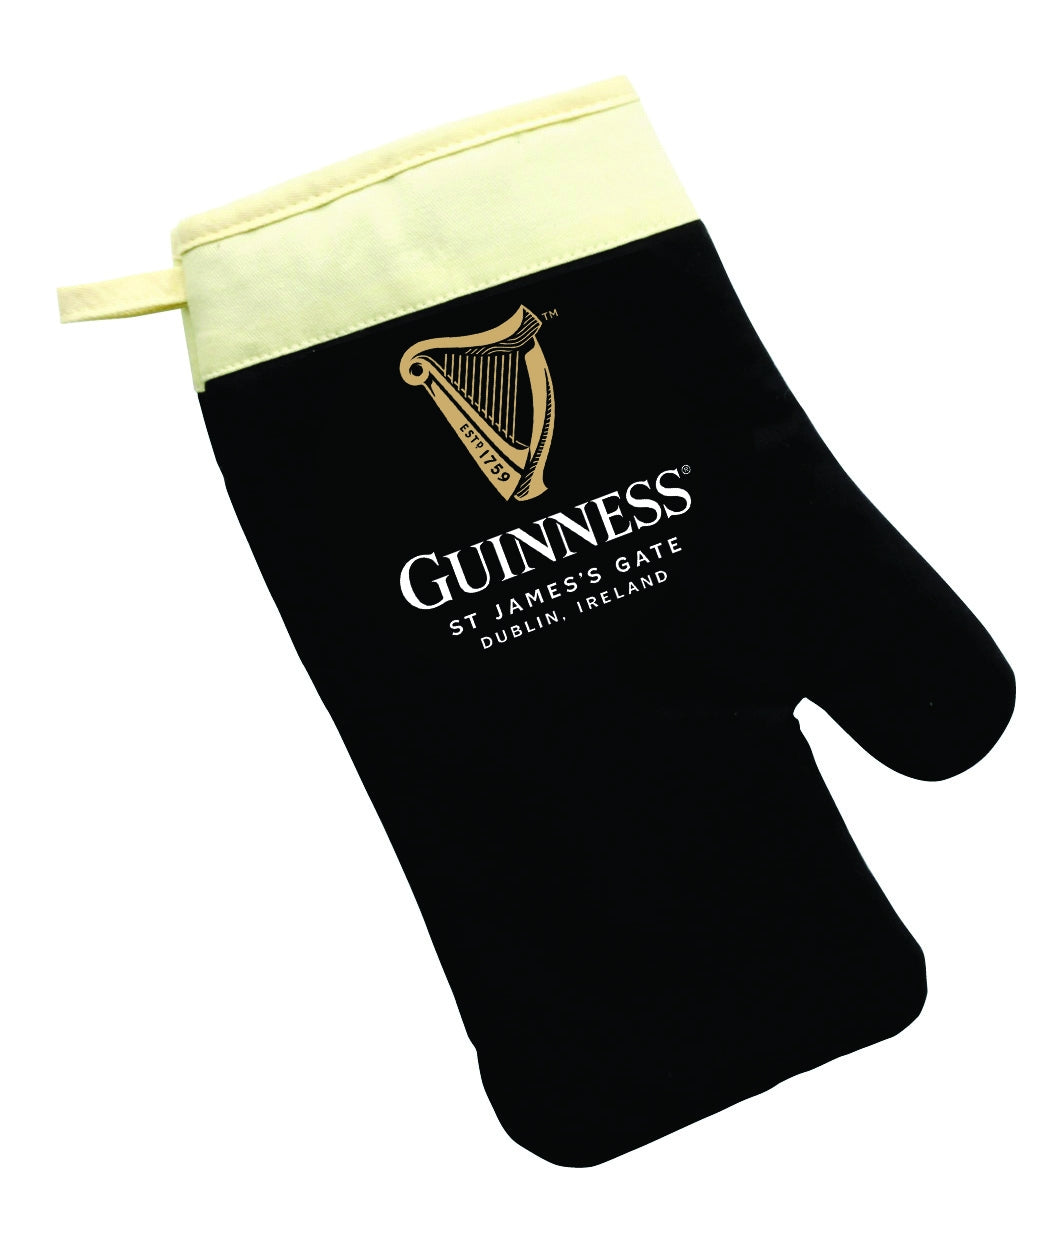 Guinness Pint Shaped Oven Glove